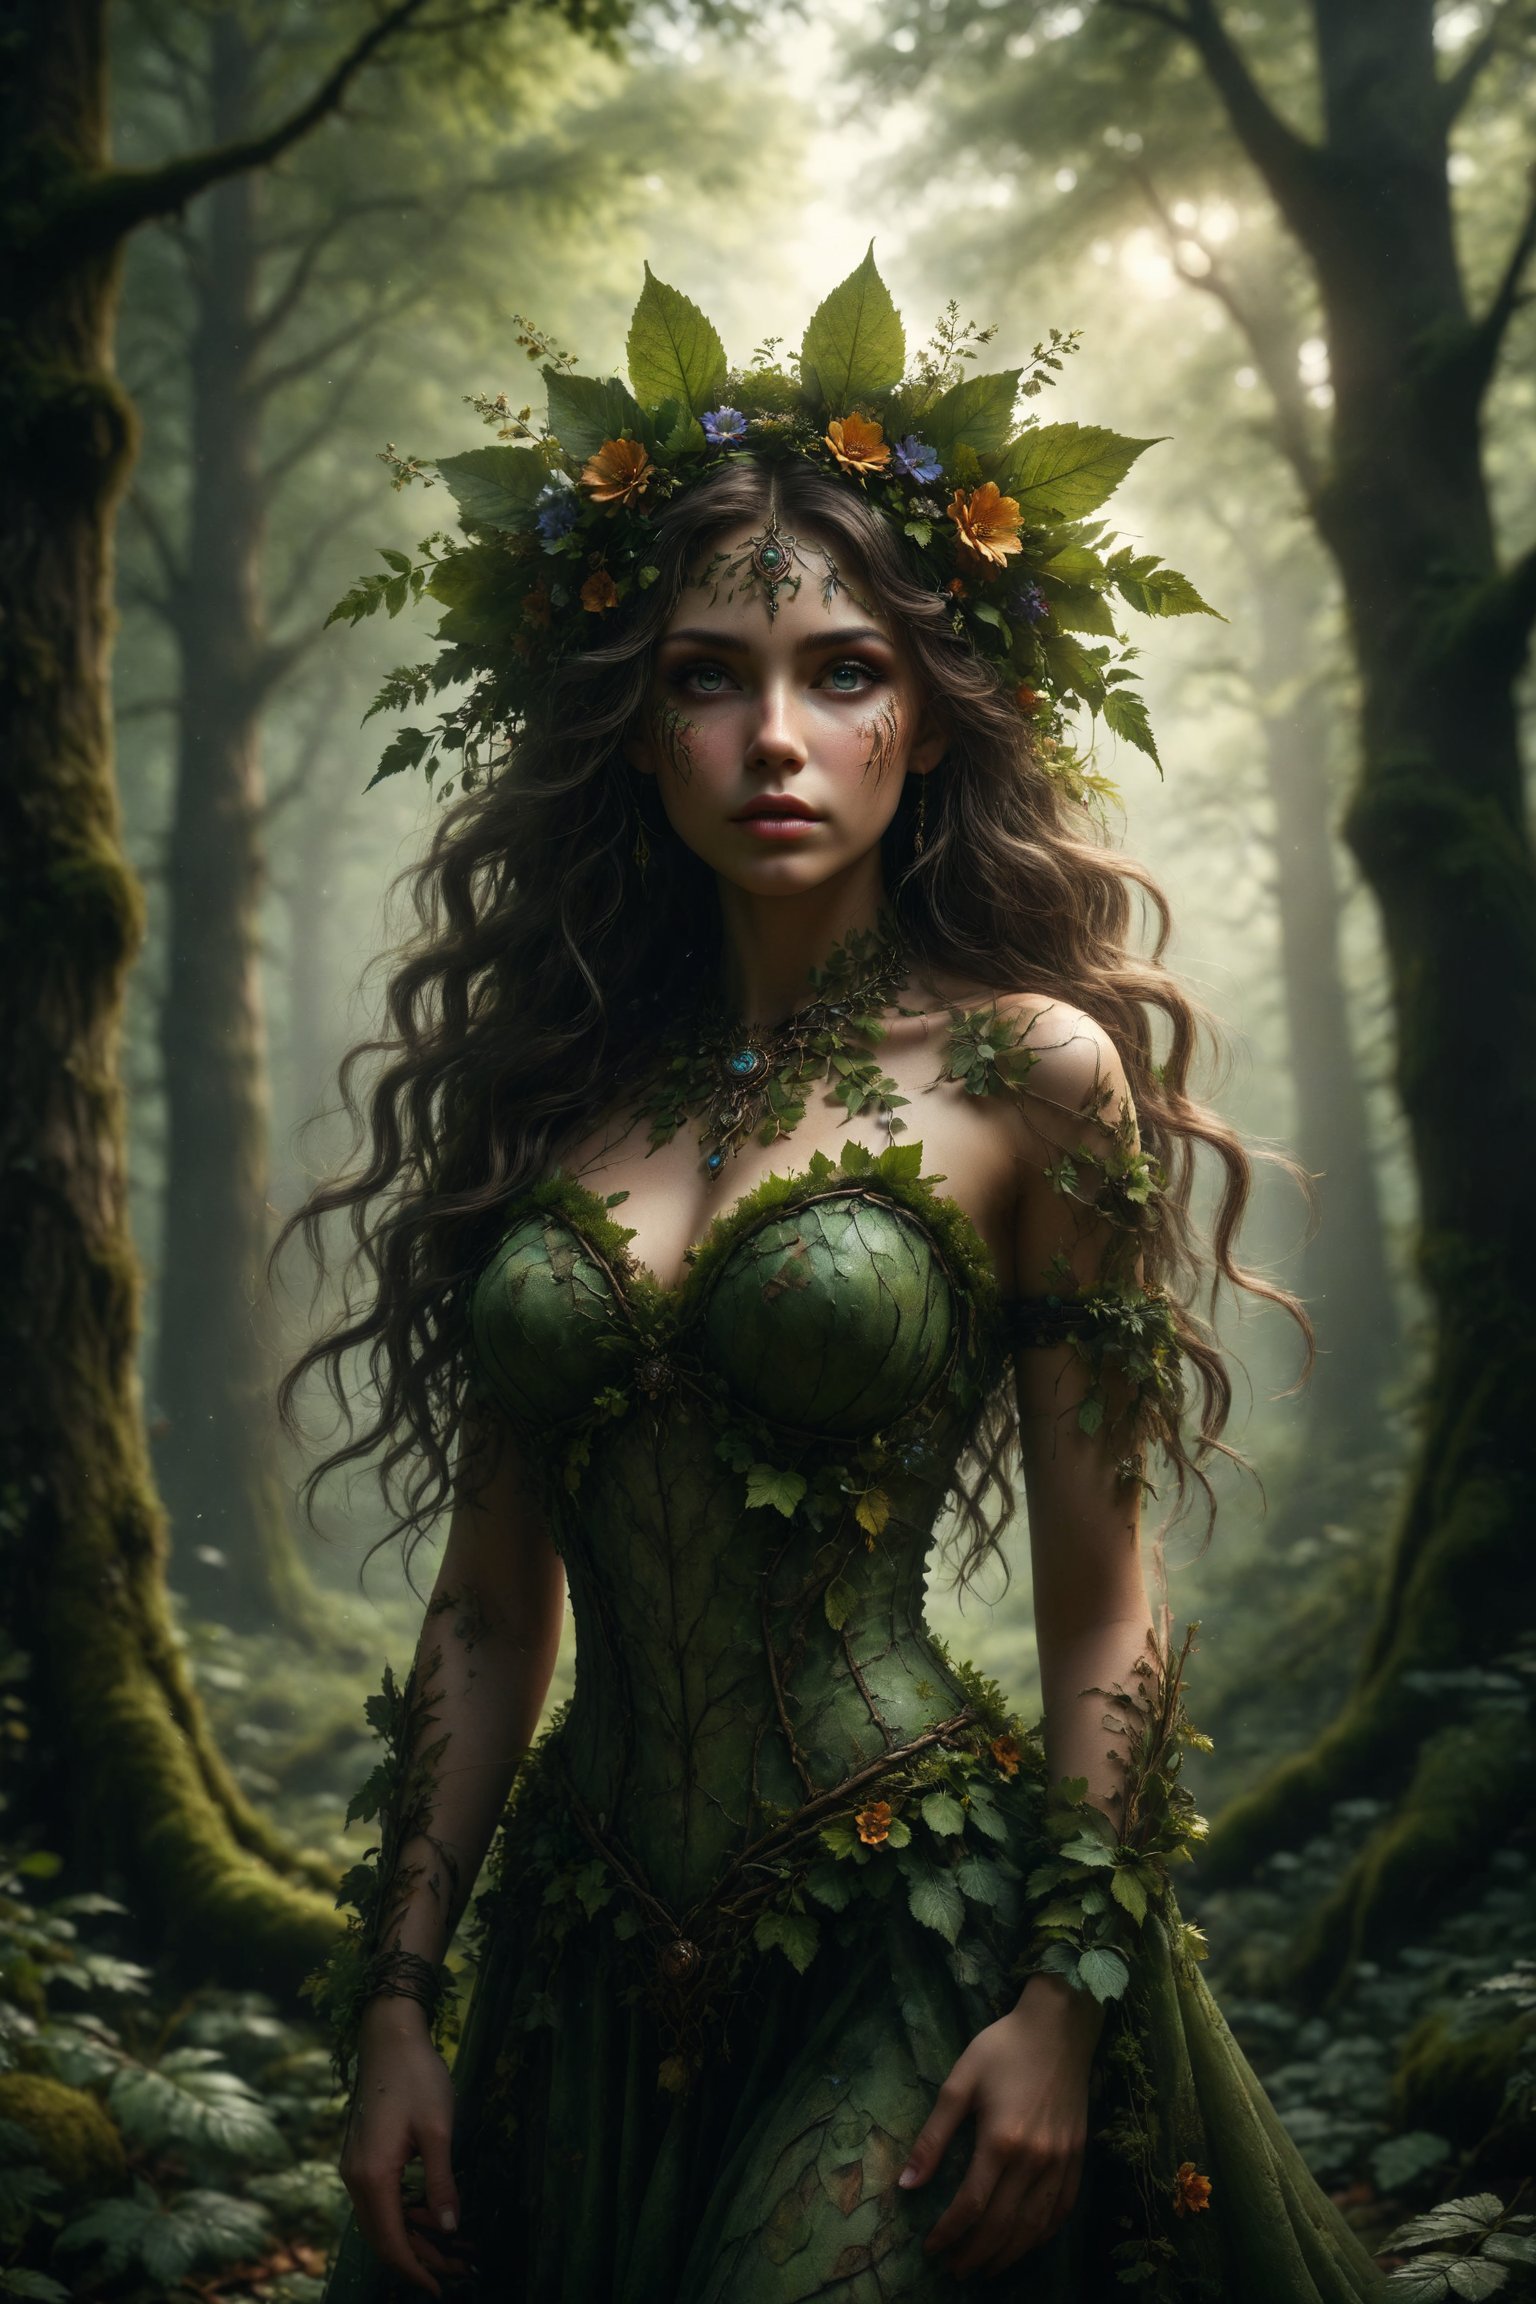 Queen of forest, full body, Sylvana is a woodland goddess, her hair adorned with leaves and flowers that change with the seasons. Her eyes reflect the tranquility and mystery of deep forests.